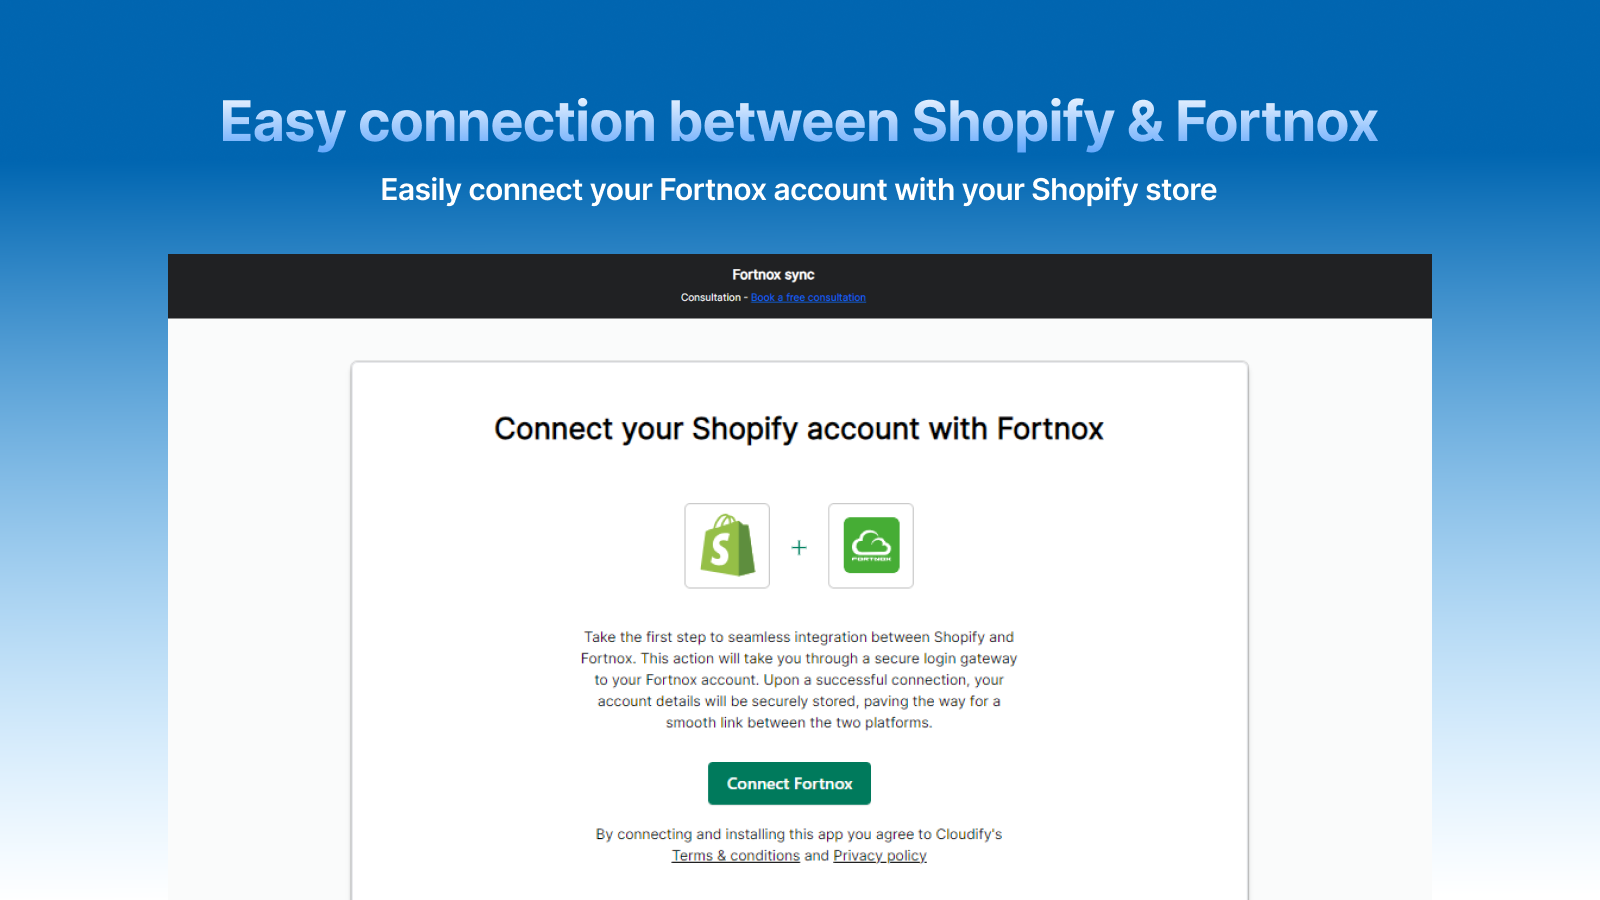 Easily connect your Fortnox account with your Shopify store